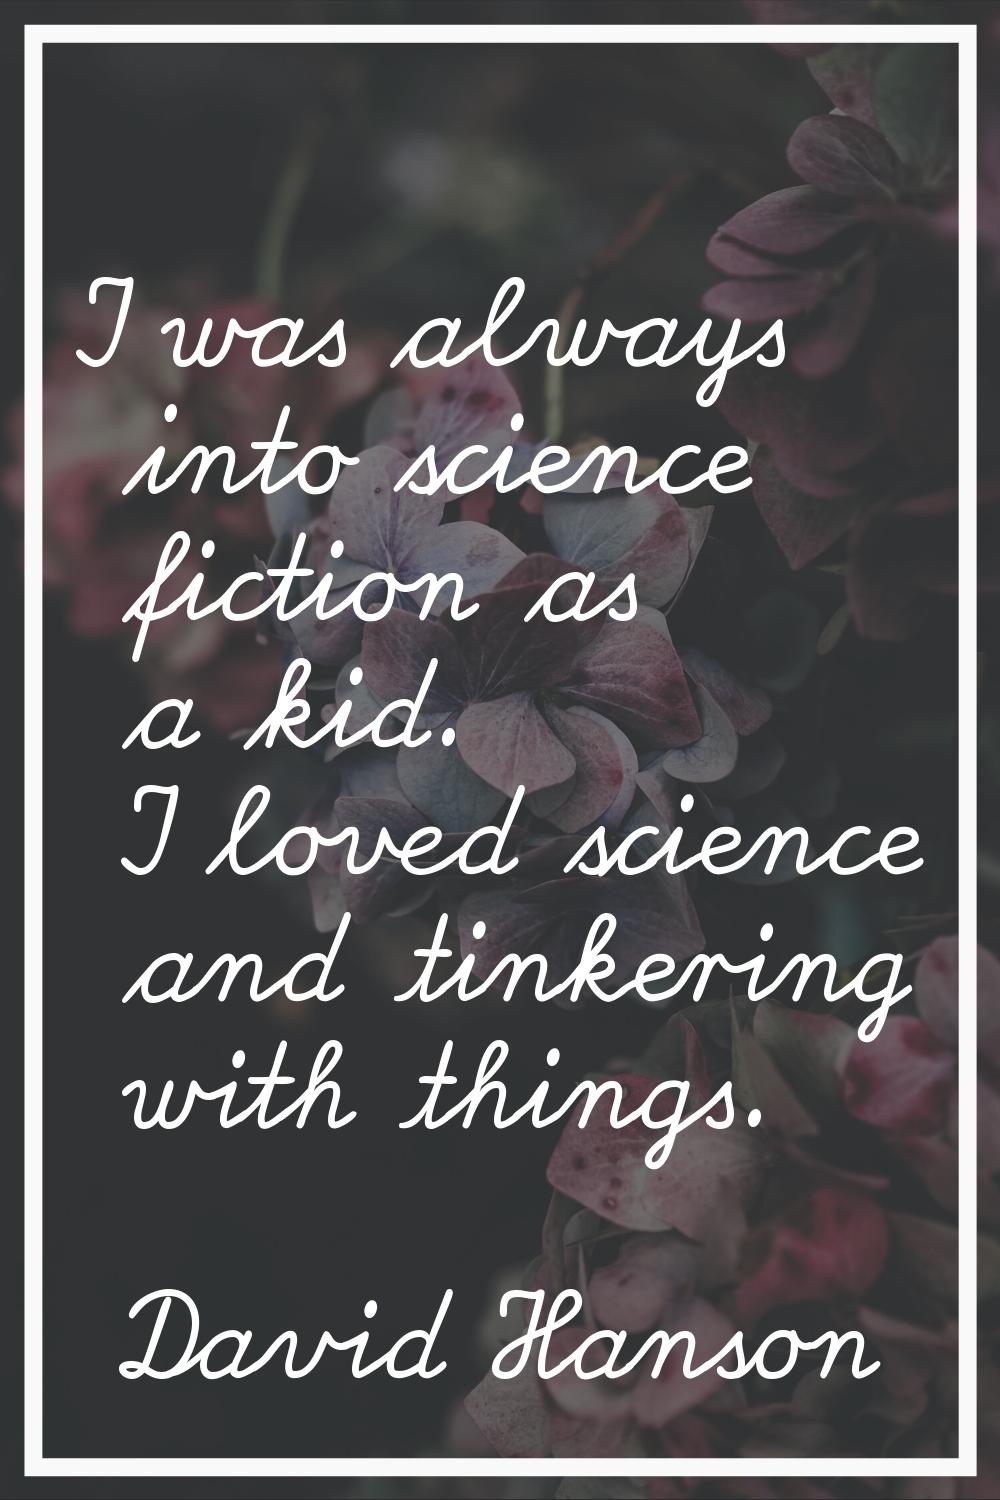 I was always into science fiction as a kid. I loved science and tinkering with things.